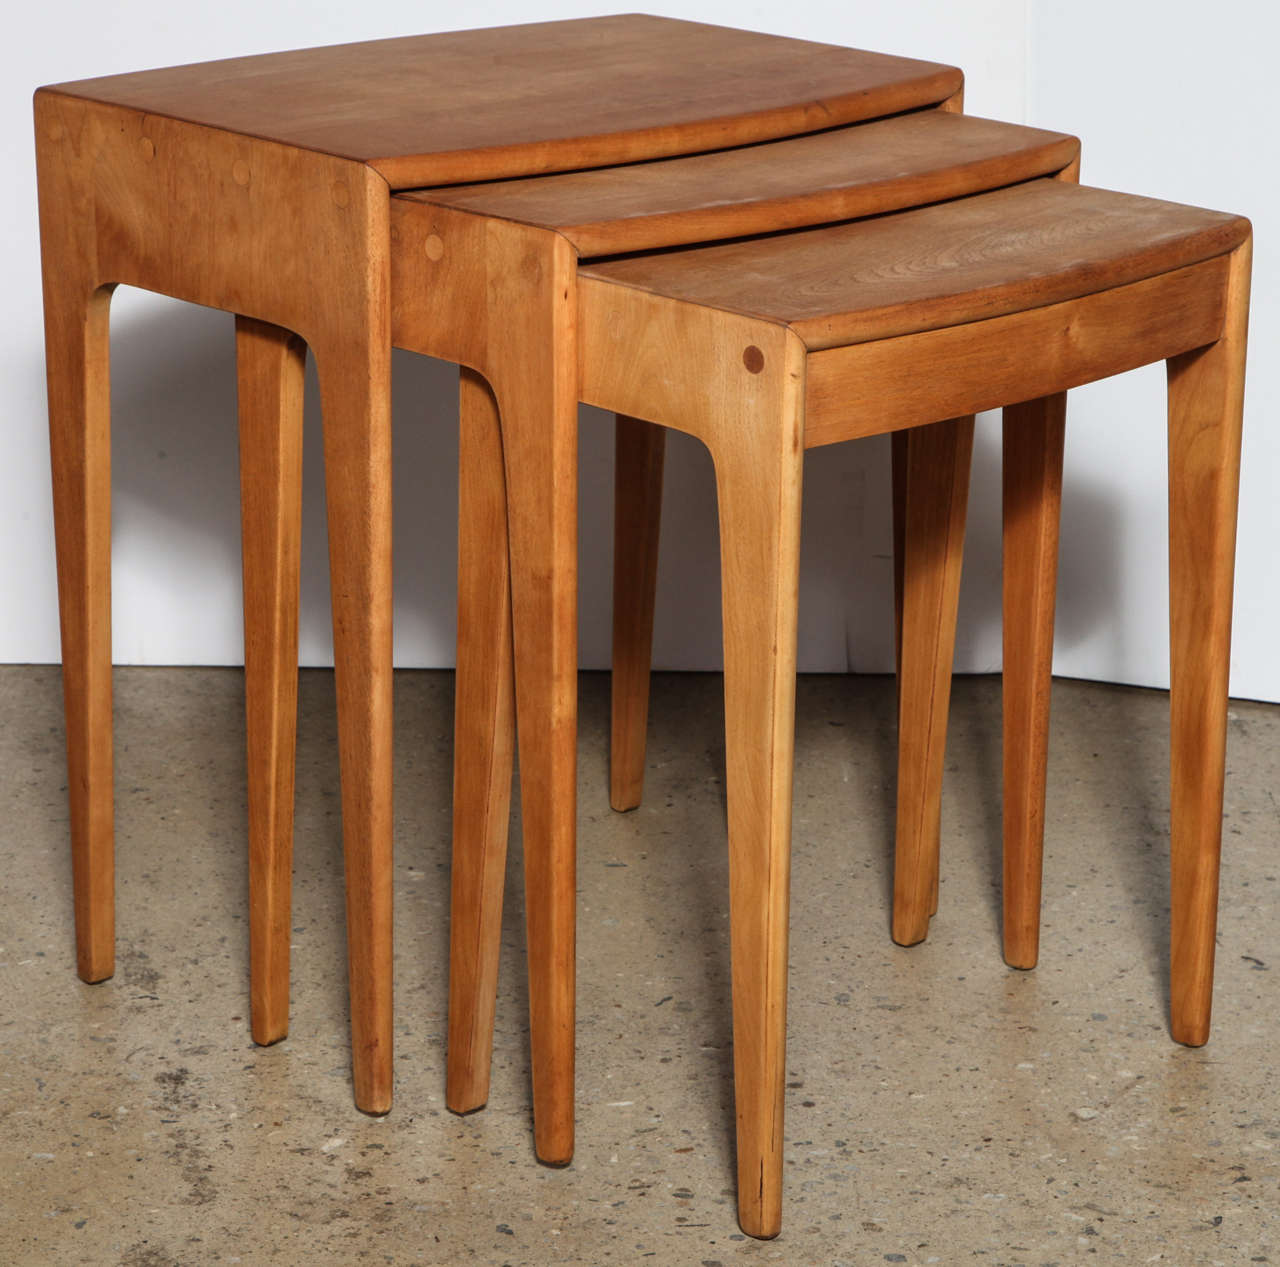 3 classic early 1950's Heywood Wakefield M312G Occasional Tables in solid Maple with round detail joints. The tables fit easily inside one another. Great as End Tables for entertaining or TV dinners. Fantastic utilitarian, multi-use Tables for small